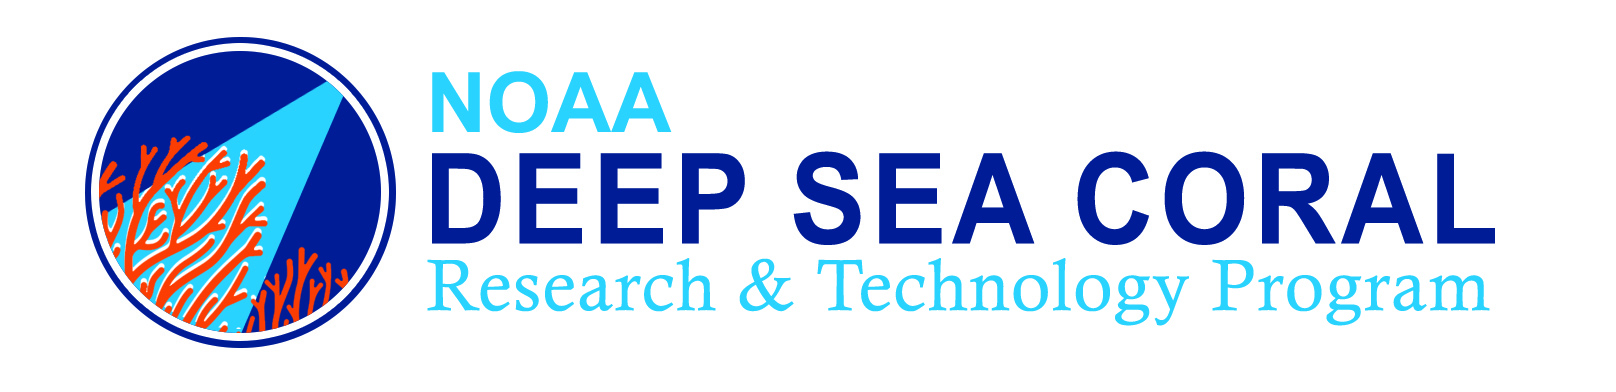 NOAA Deep Sea Coral Research and Technology Program